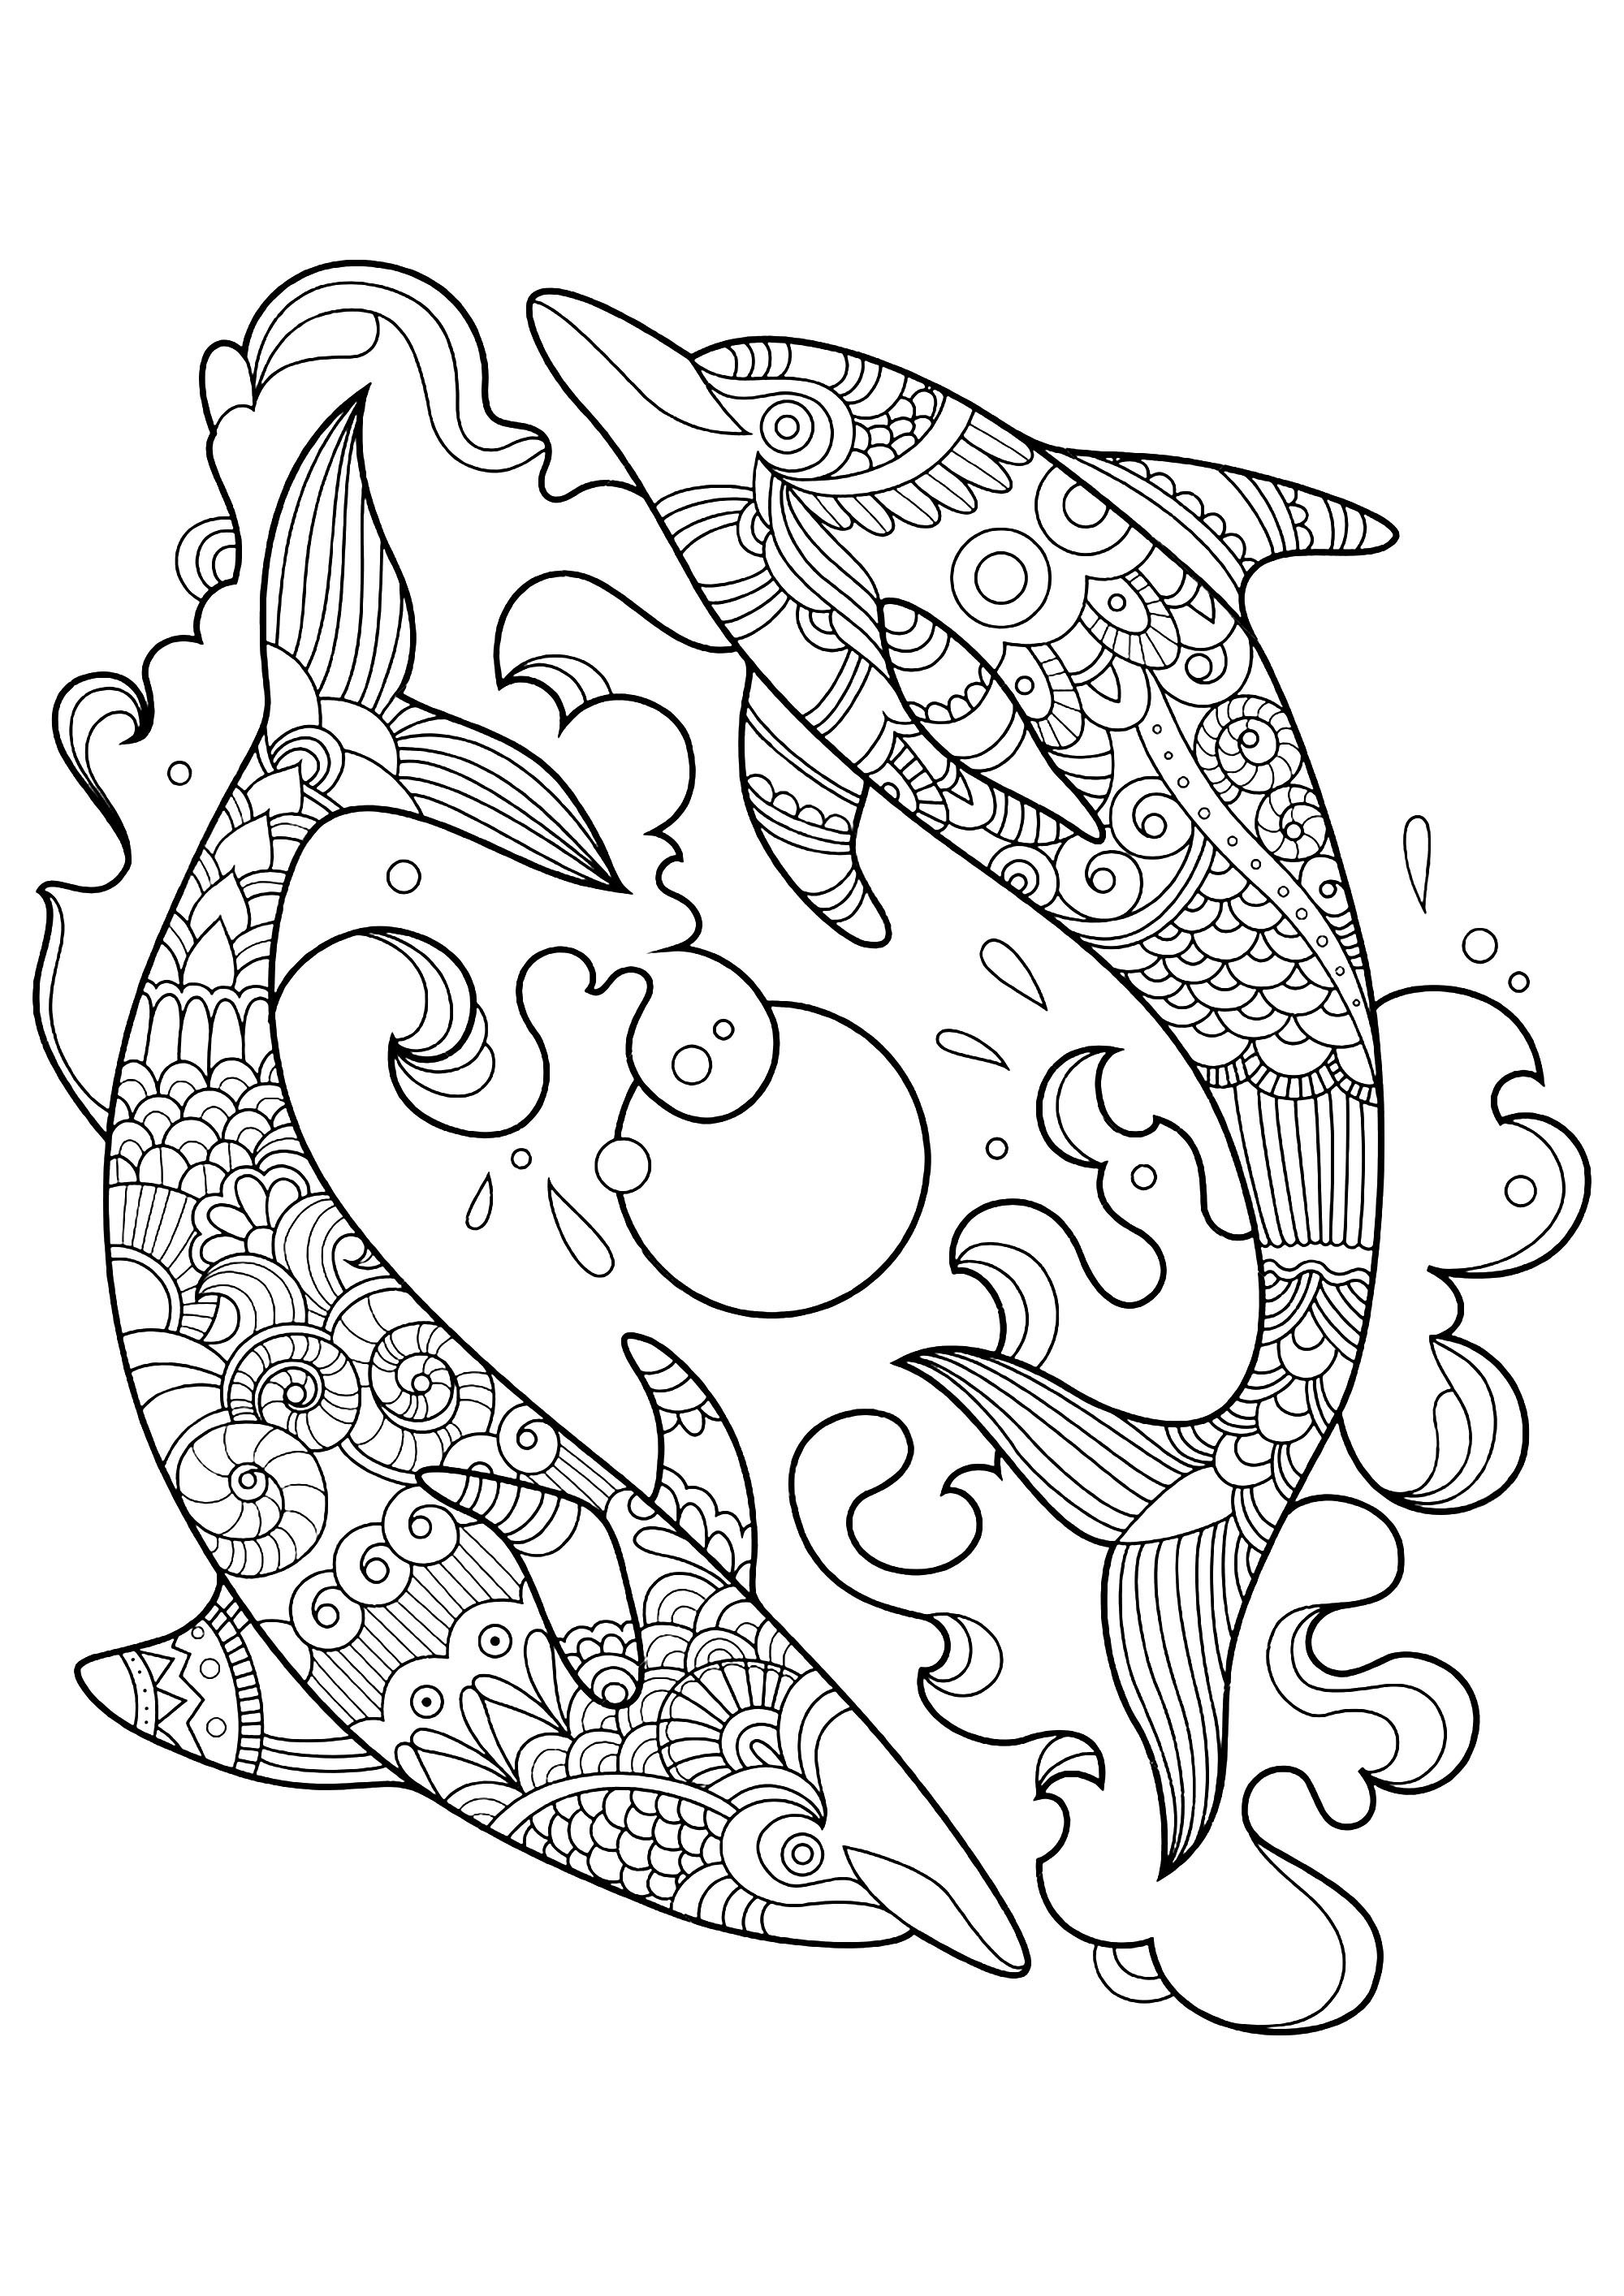 dolphin coloring page dolphins to color for children dolphins kids coloring pages page coloring dolphin 